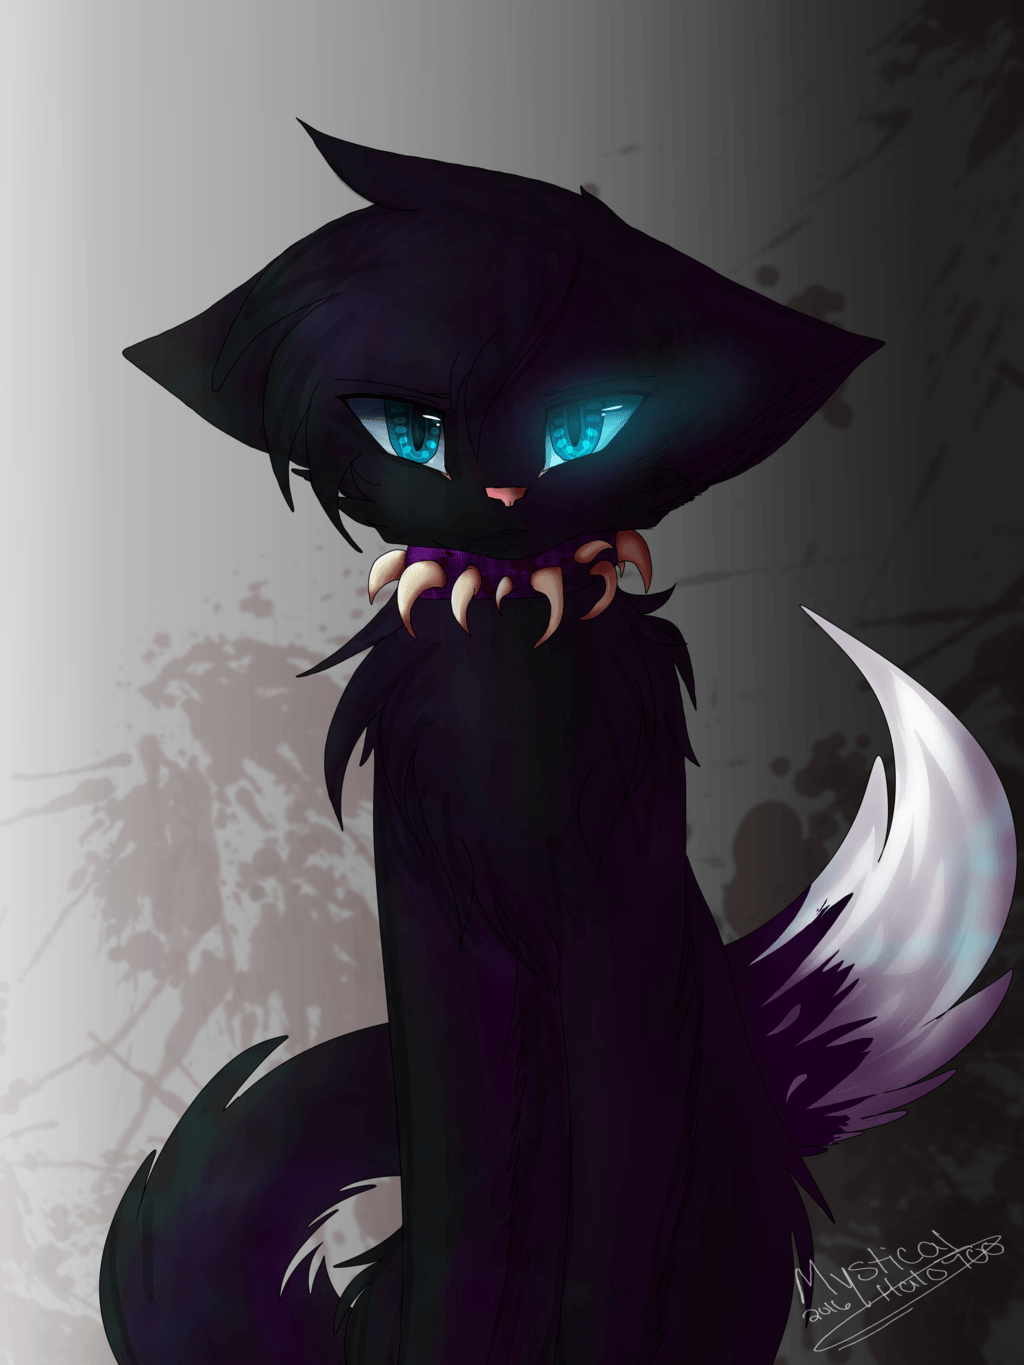 Scourge cats [2016]